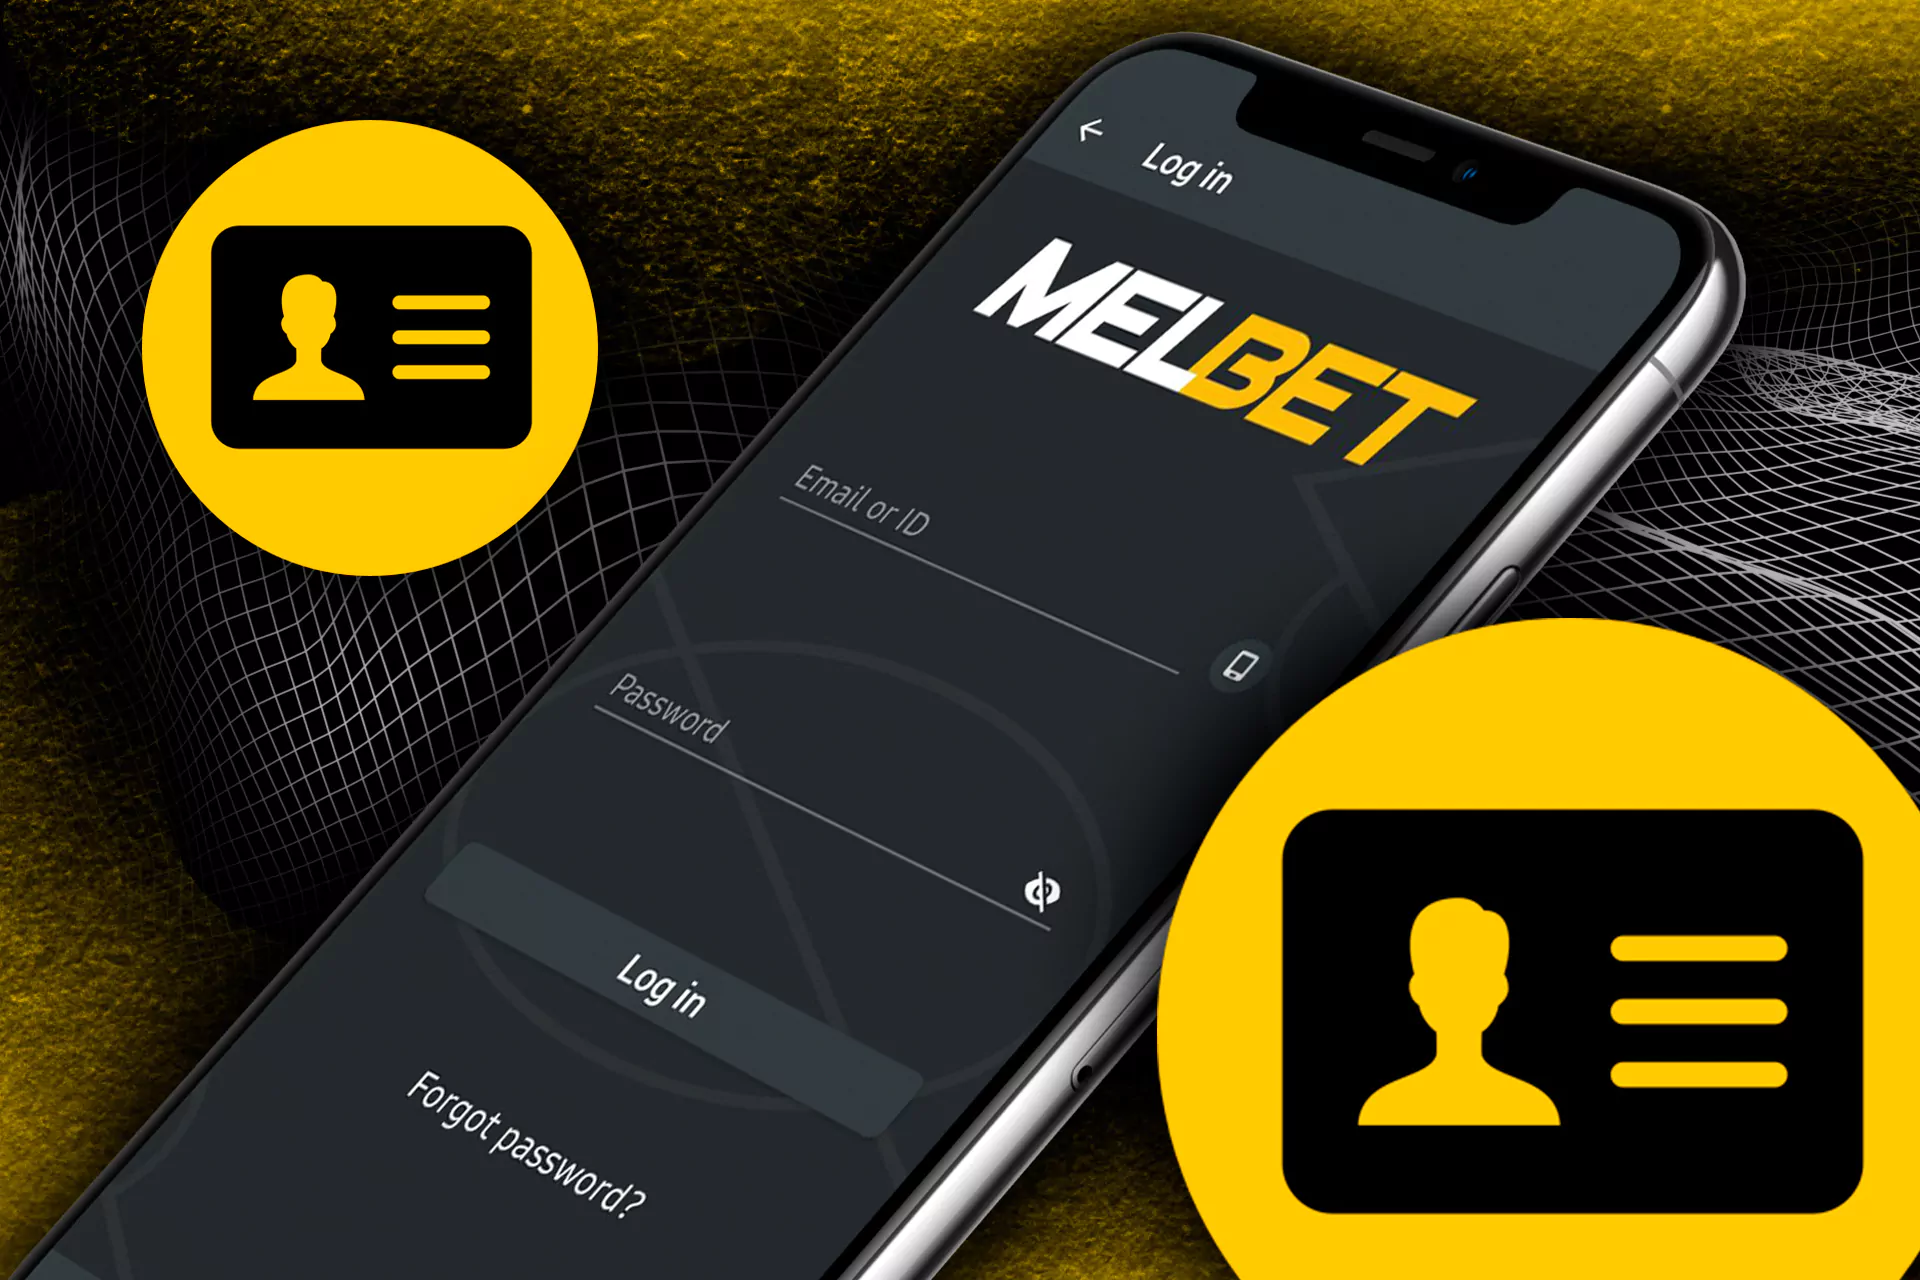 Log in to the Melbet account using your username and password.